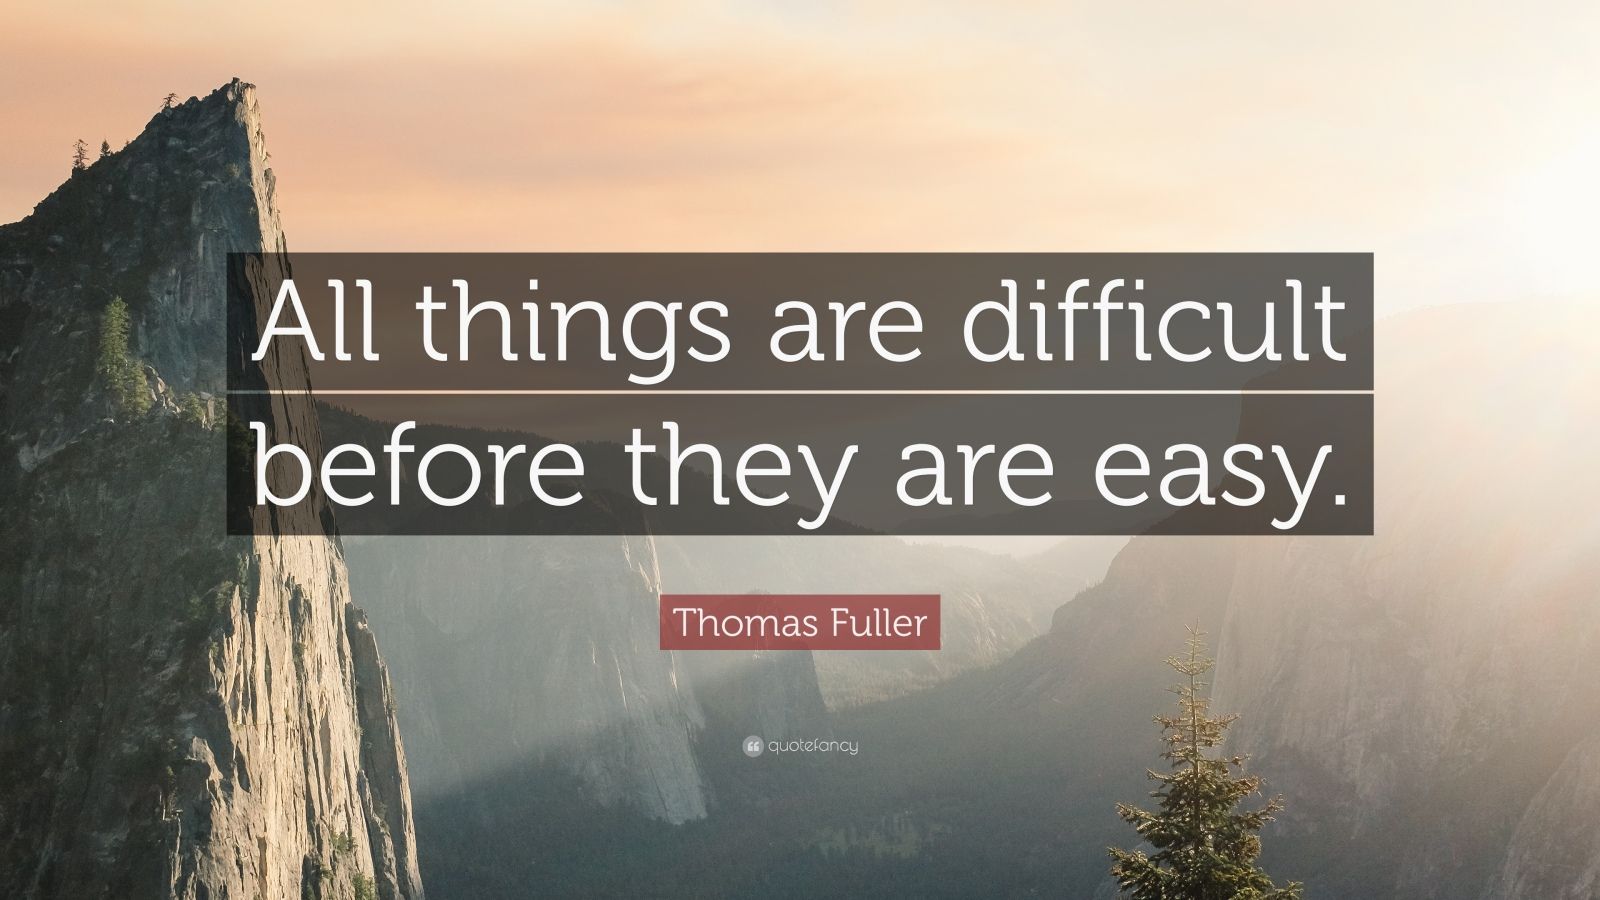 Thomas Fuller Quote: “All things are difficult before they are easy